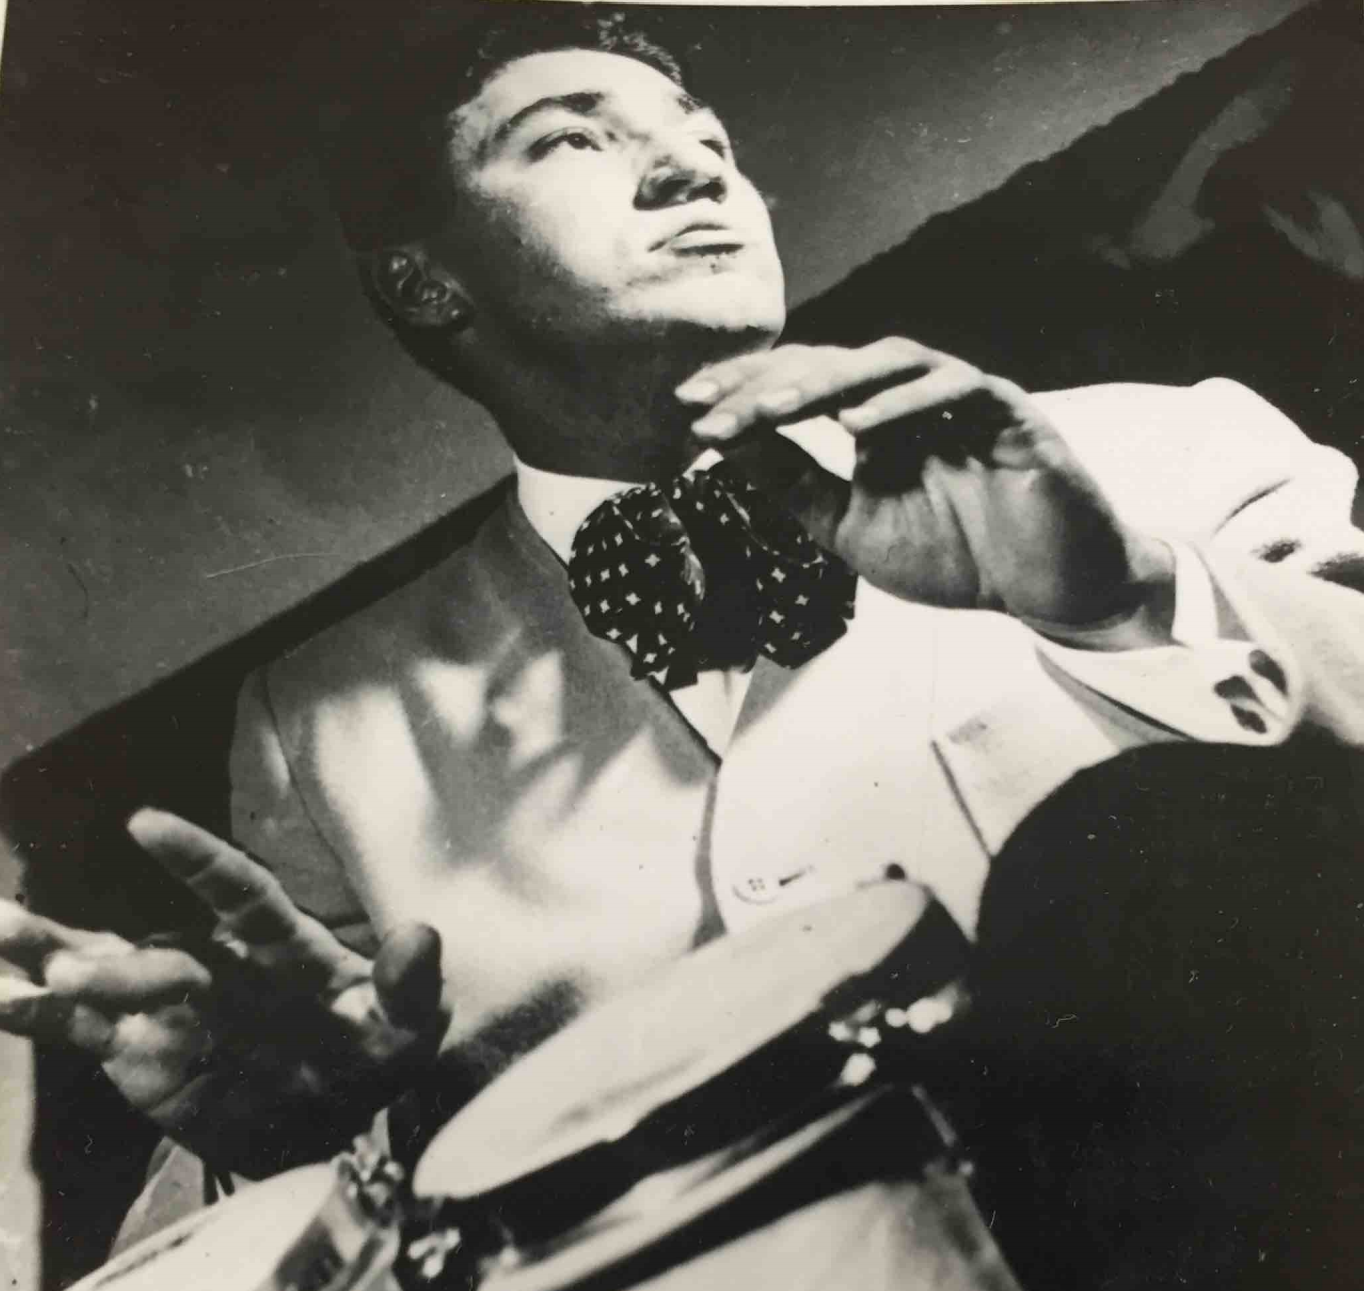 A black and white 1950s photo of a man playing bongos. He's wearing a suit and looking off camera.